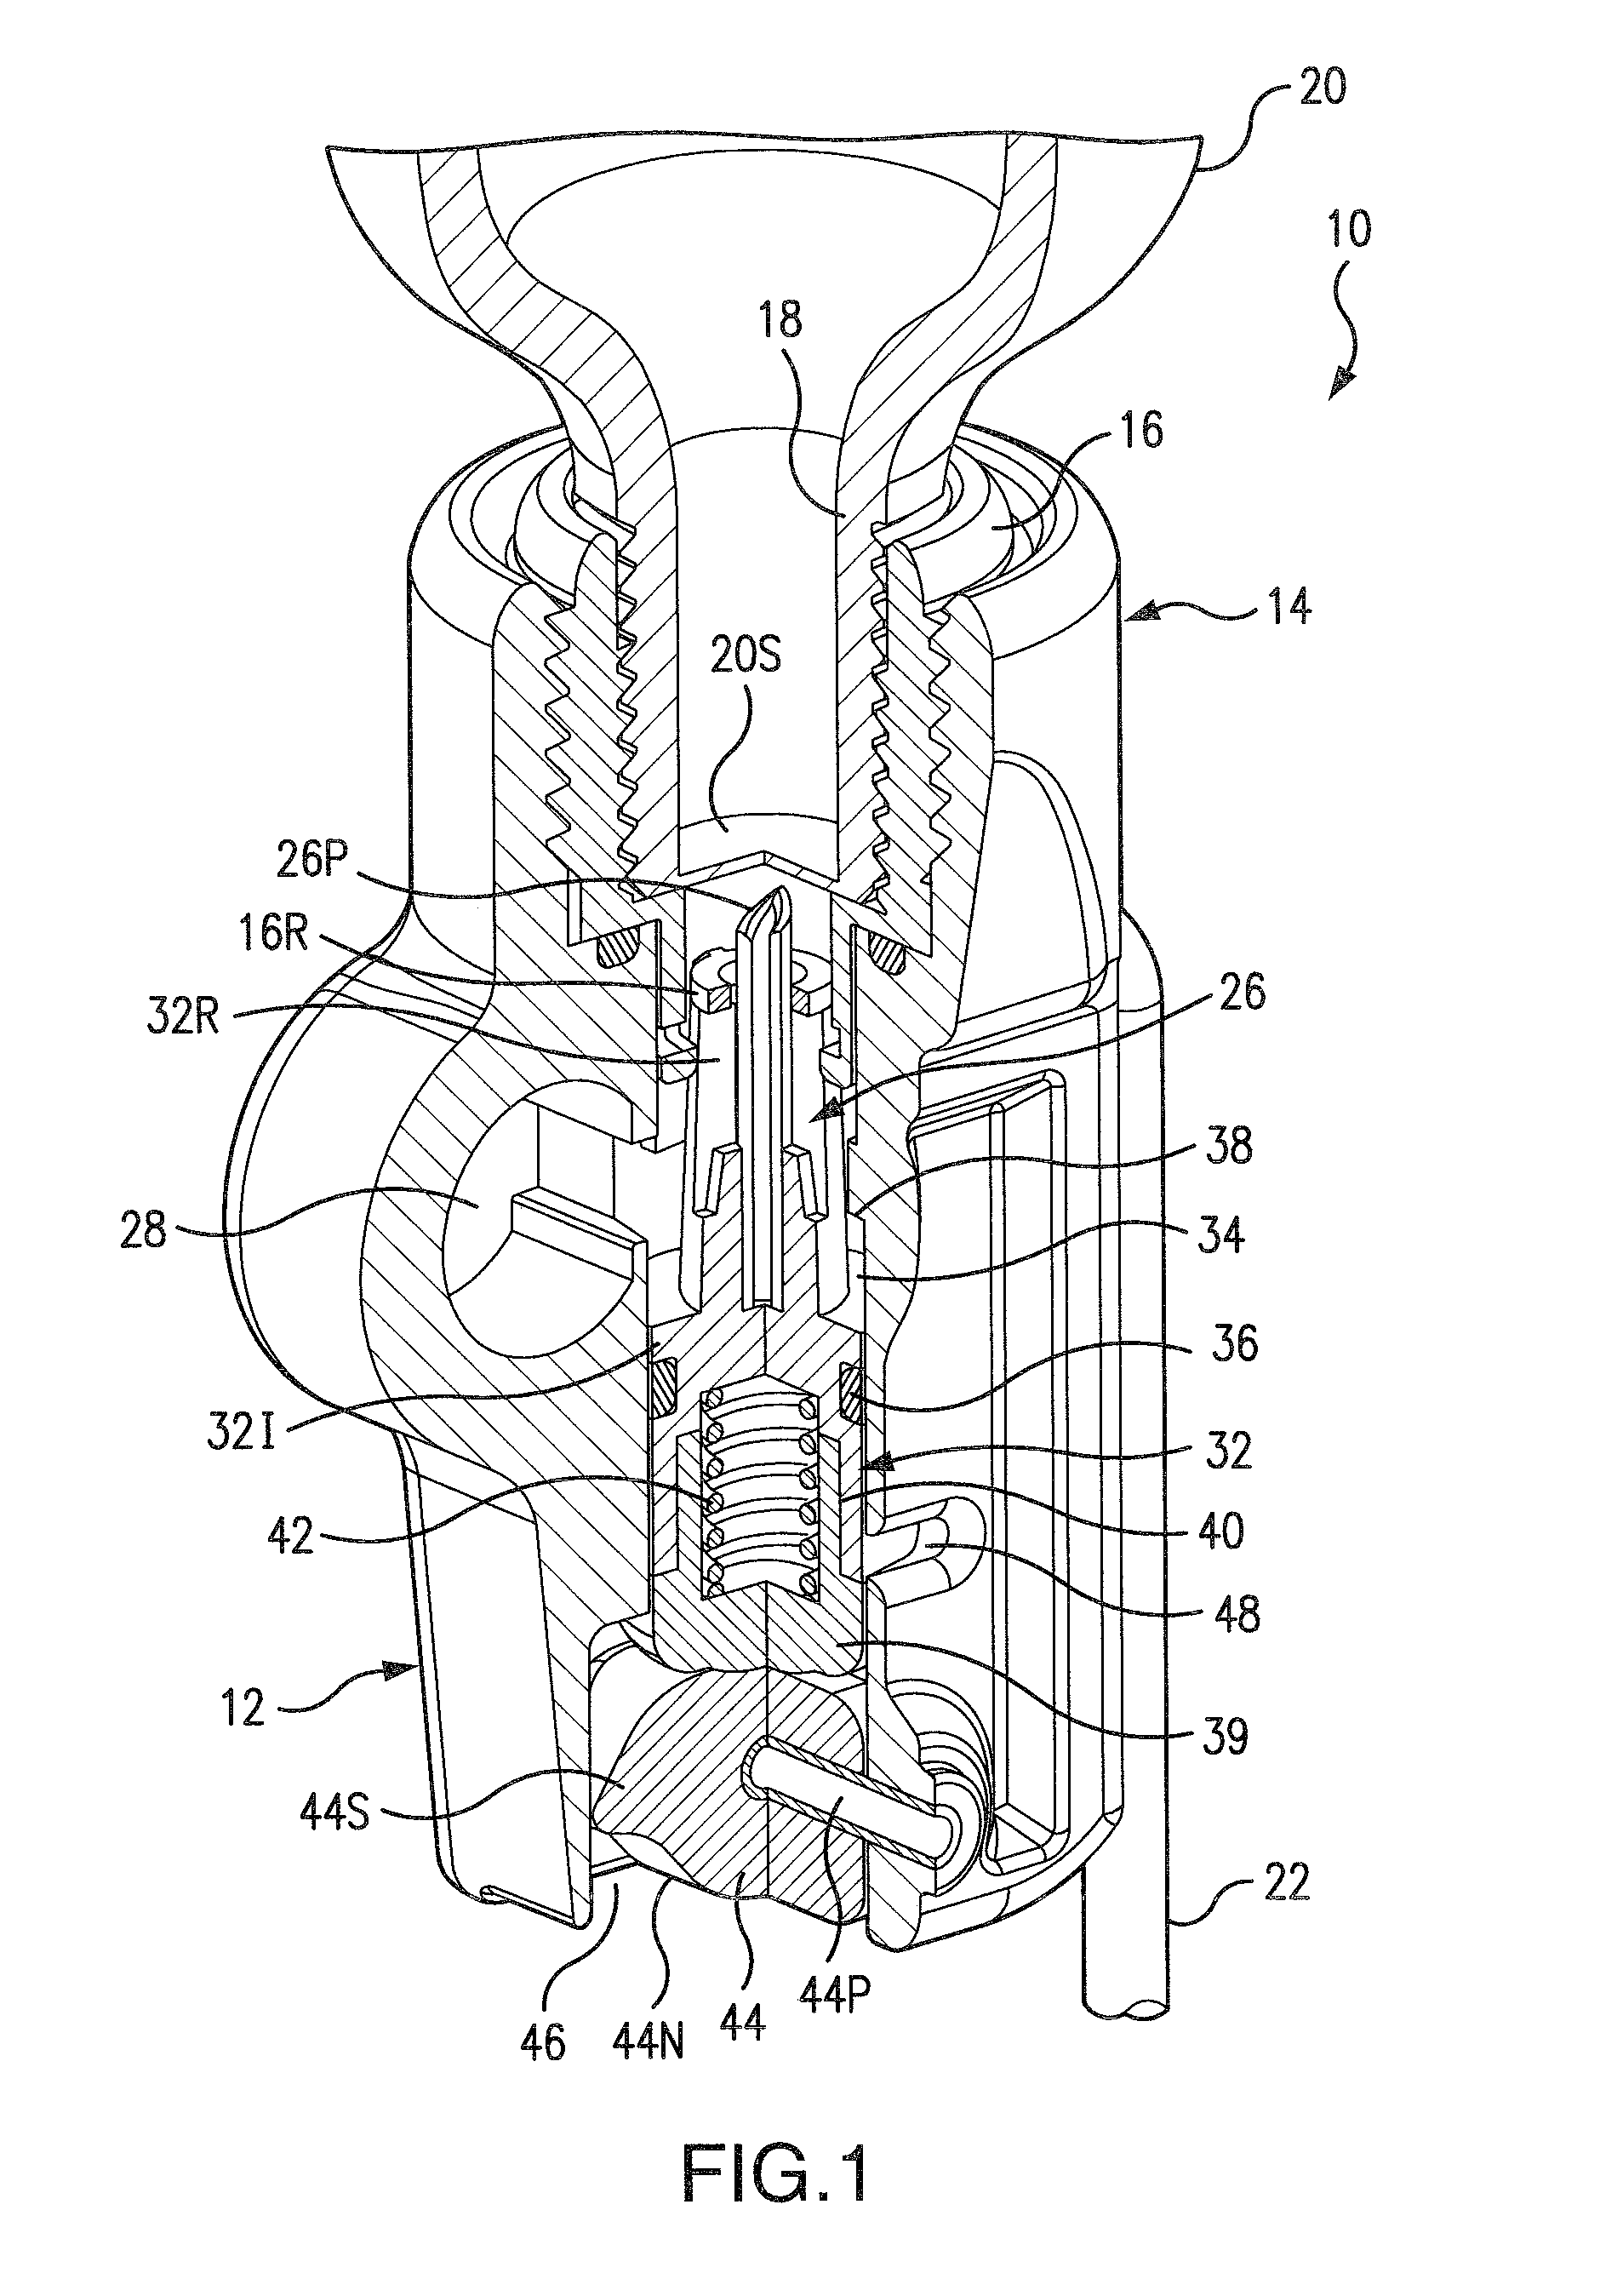 Manual inflator with cylinder connector and status indicator